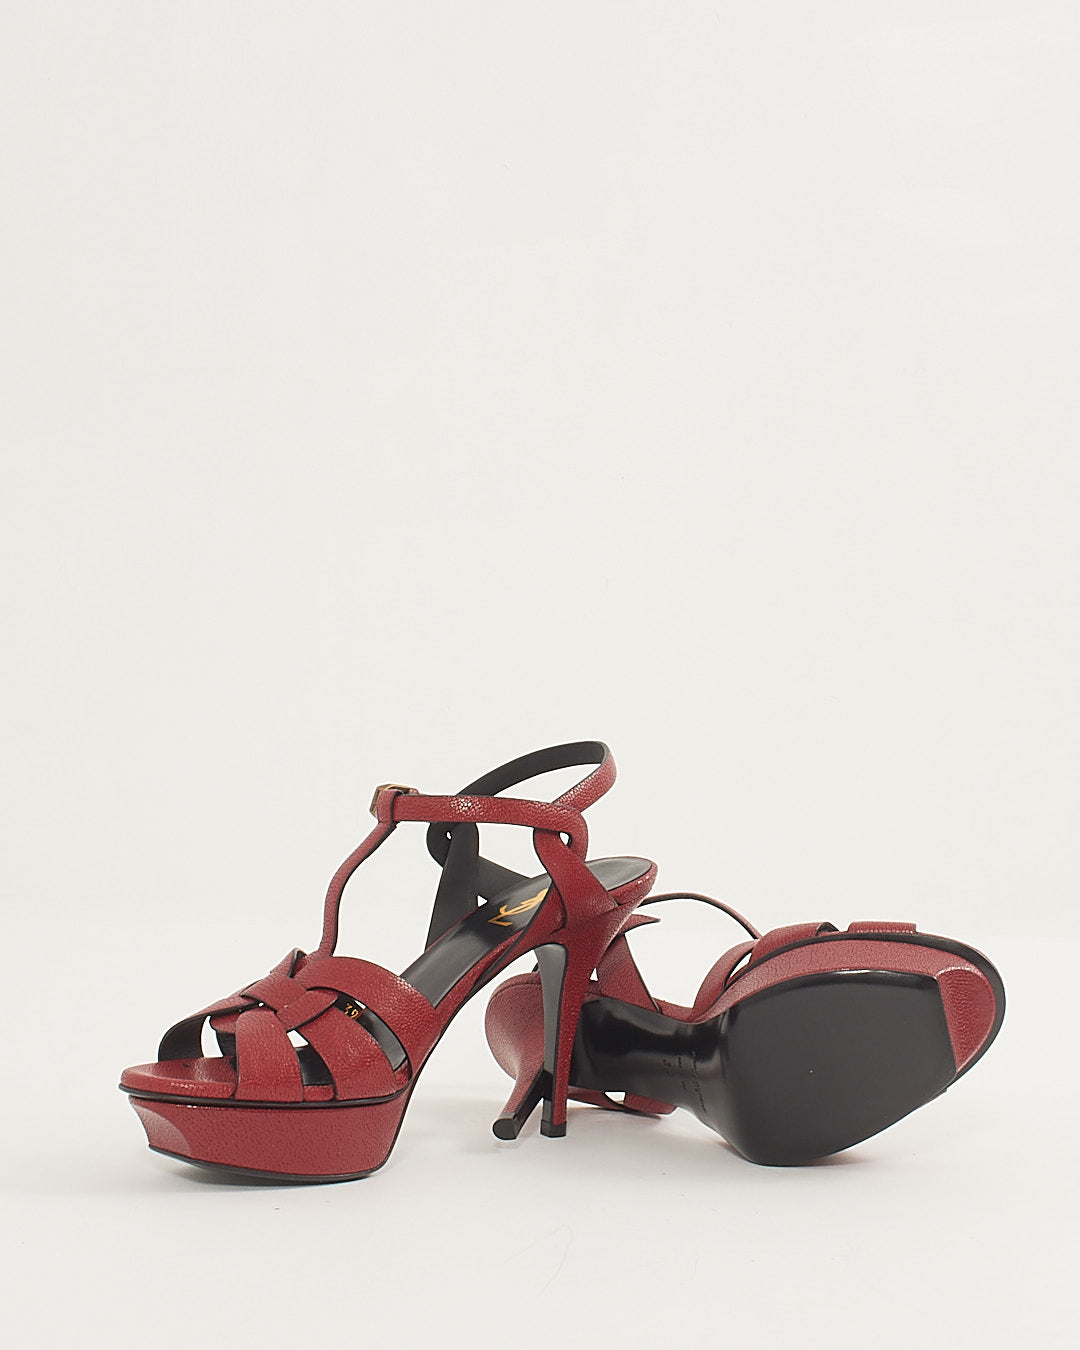 Saint Laurent Red Grained Leather Tribute Heeled Sandals - 39